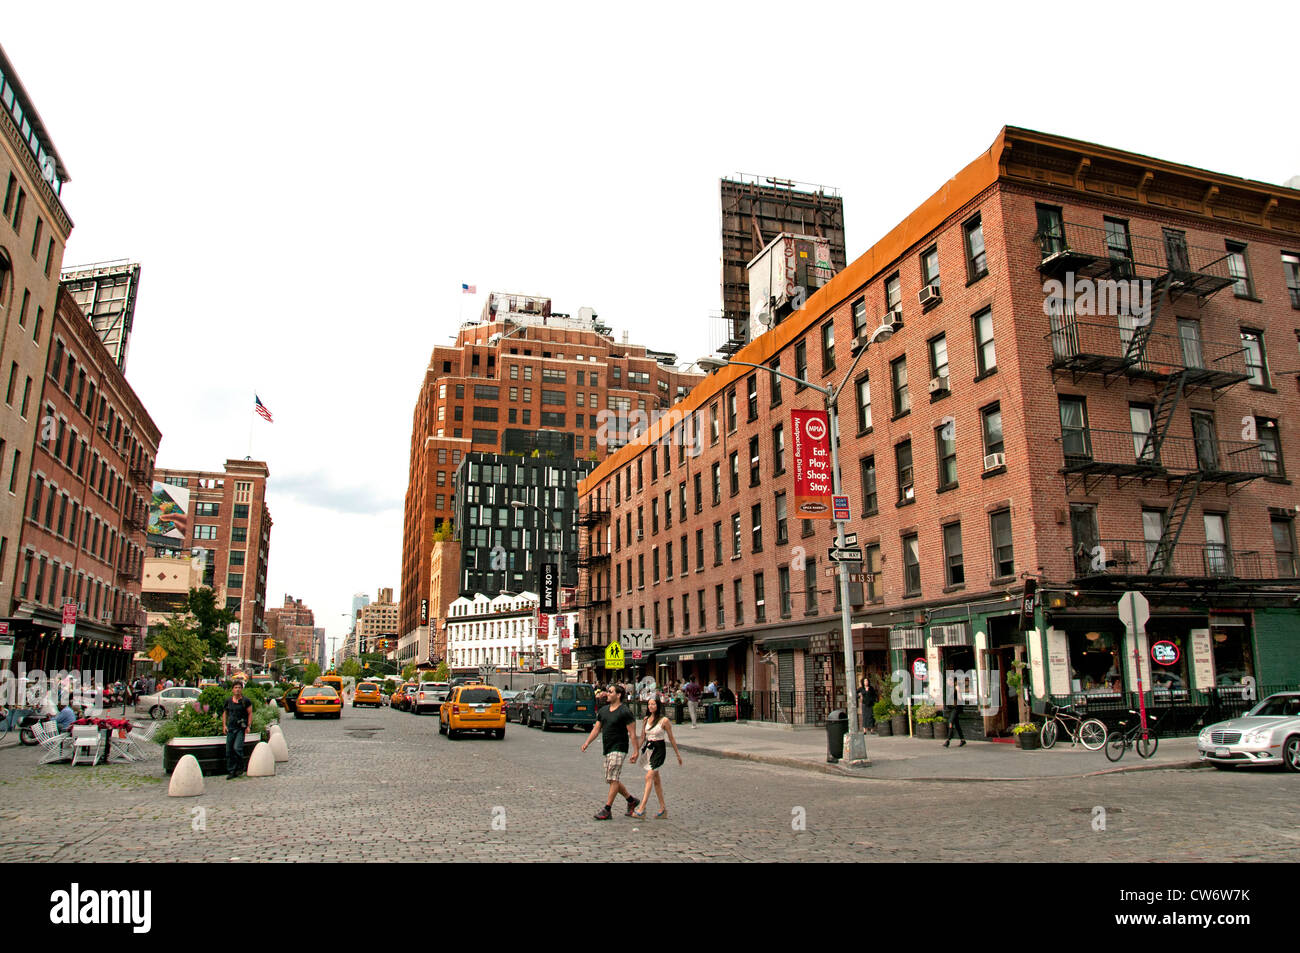 Ninth Avenue W 13 Street Meatpacking District  Manhattan New York City United States of America Stock Photo